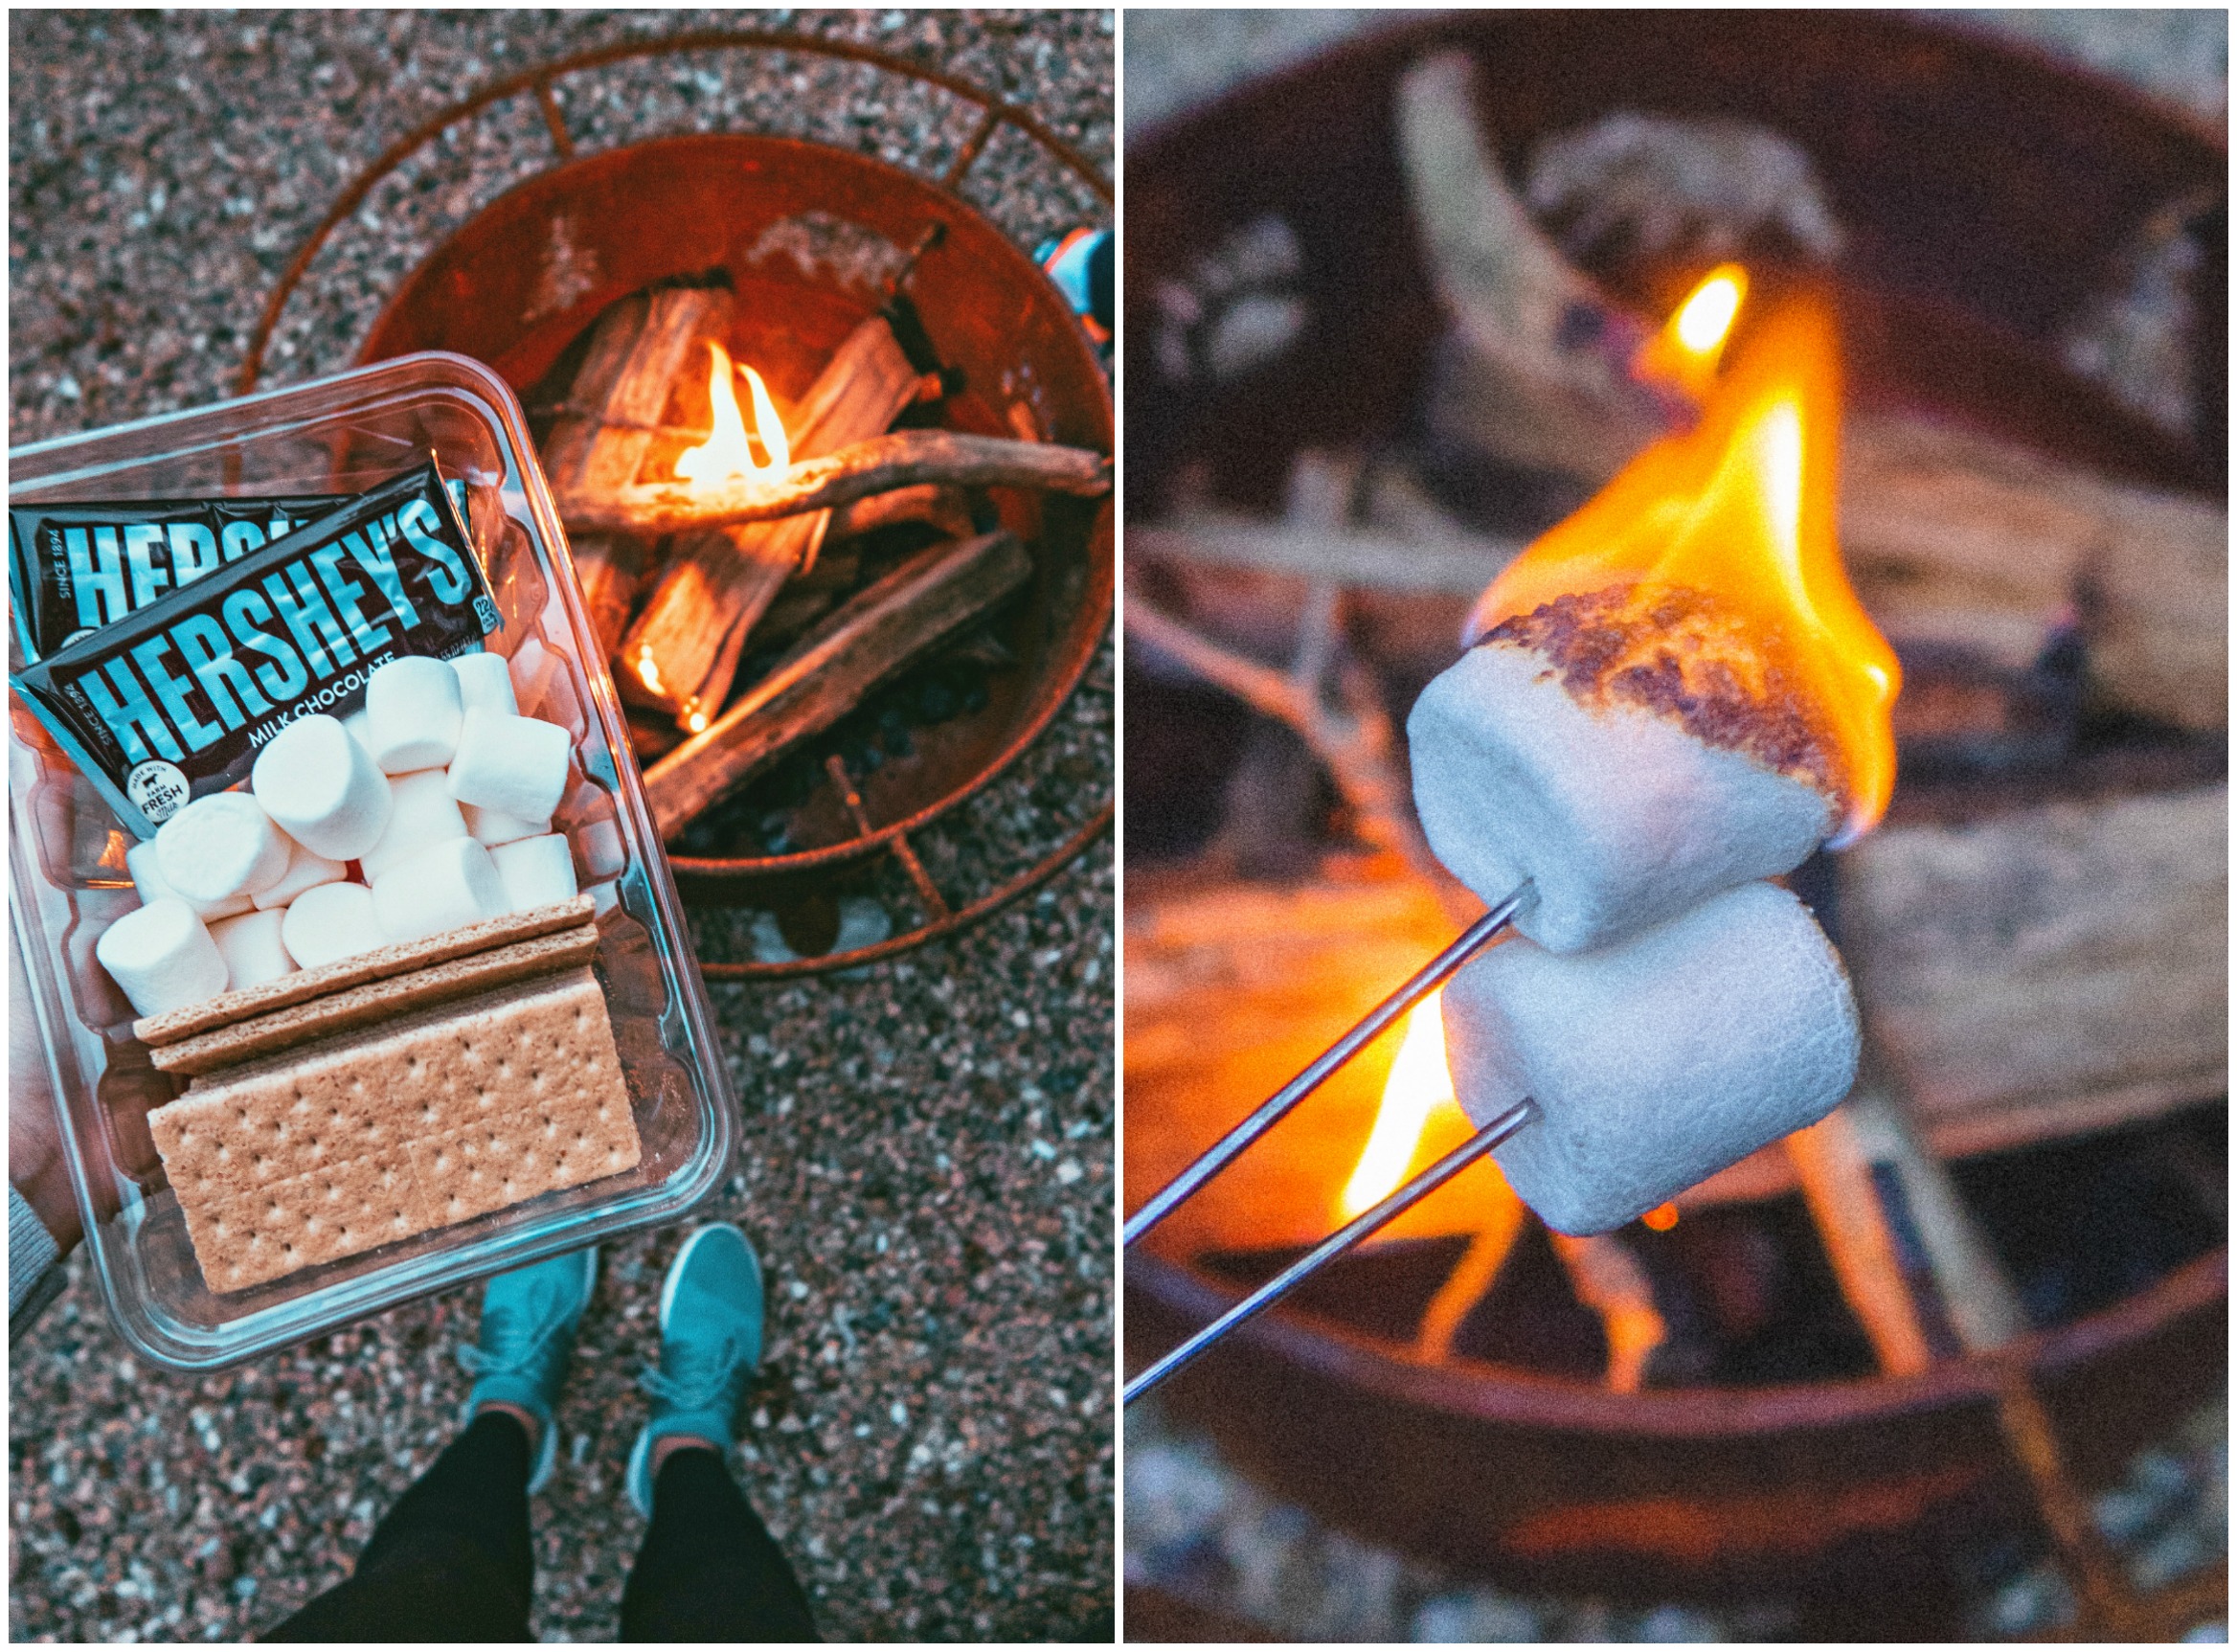 couples hiking, dogs, ruffwear, lake, mountain trip, hike, camp, fishing, Patagonia, back country, hiking boots, roasting marshmallows, s'mores, bon fire